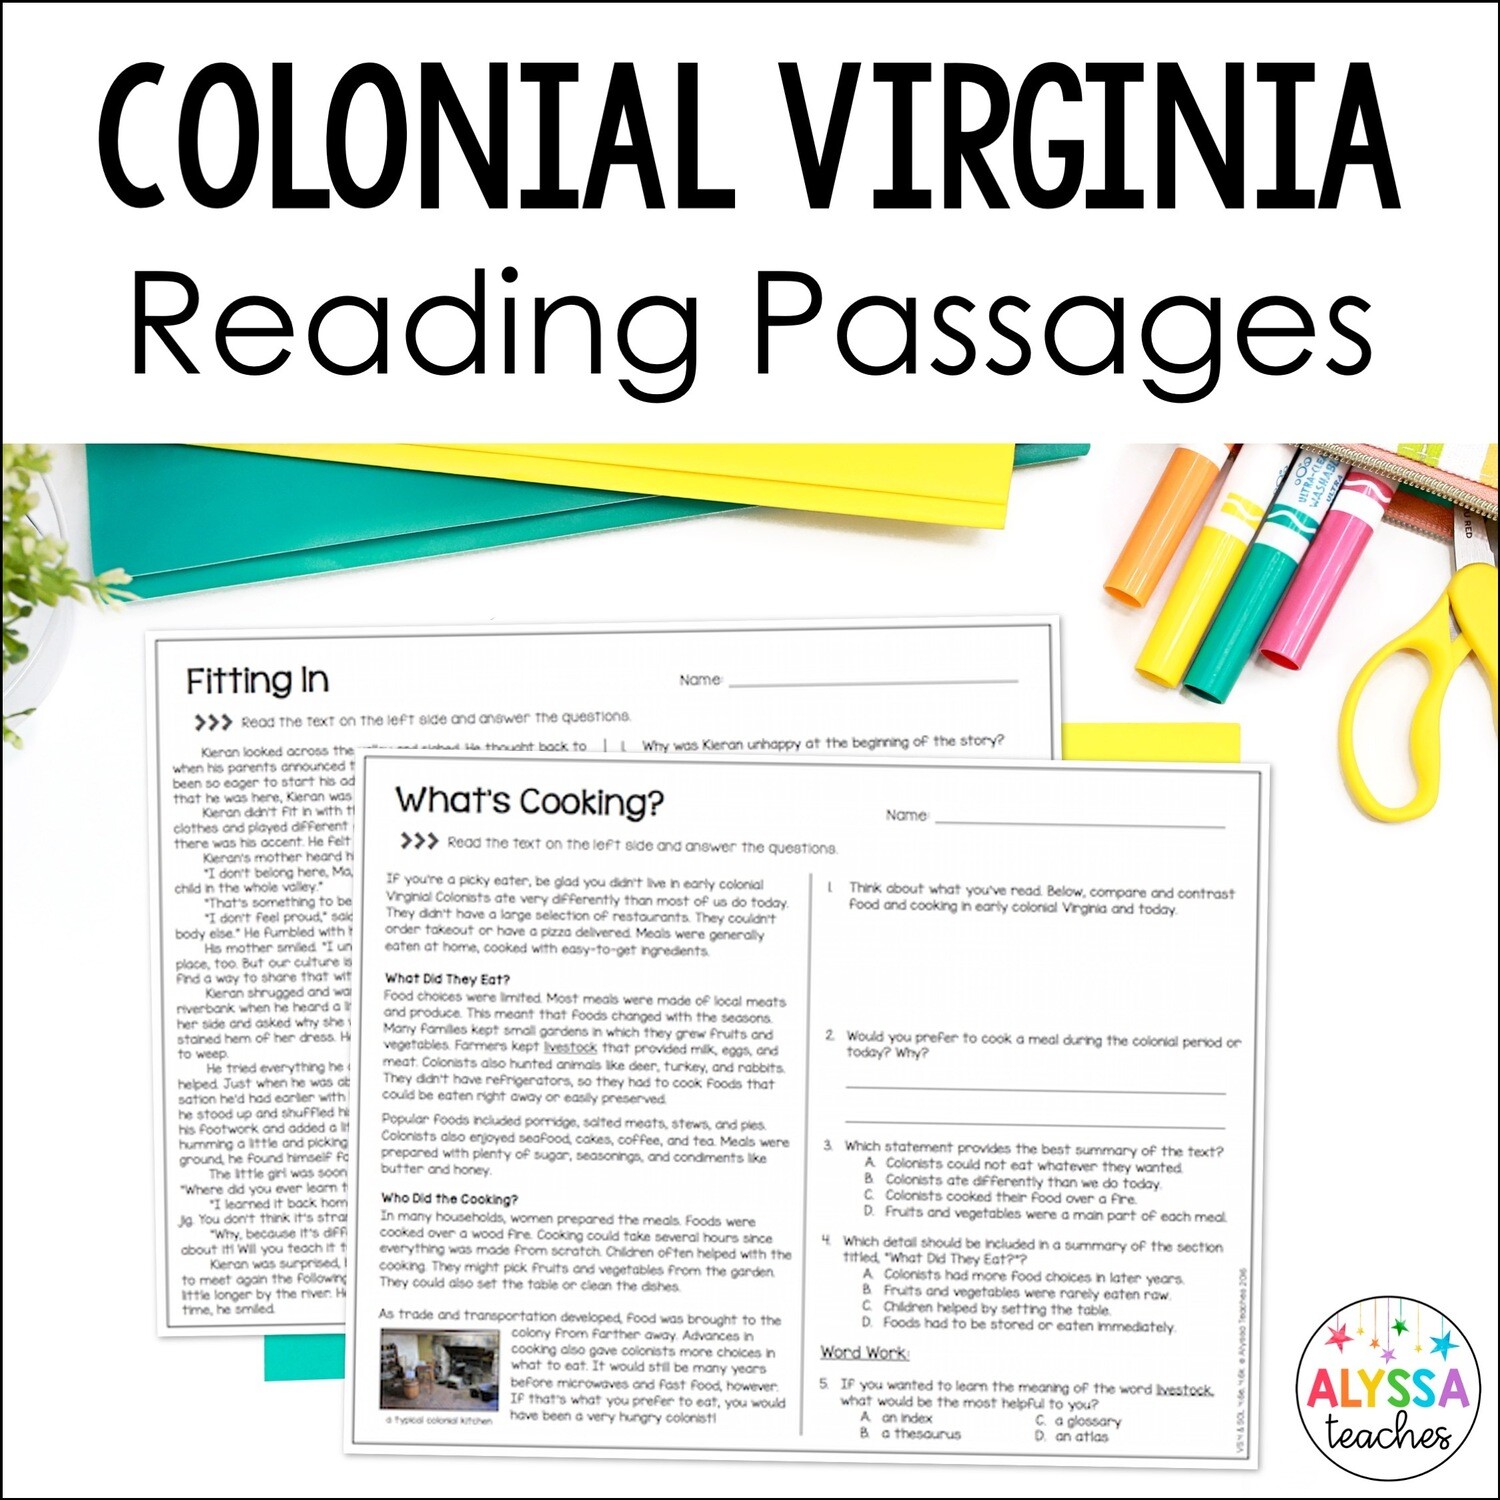 Colonial Virginia Reading Passages and Questions